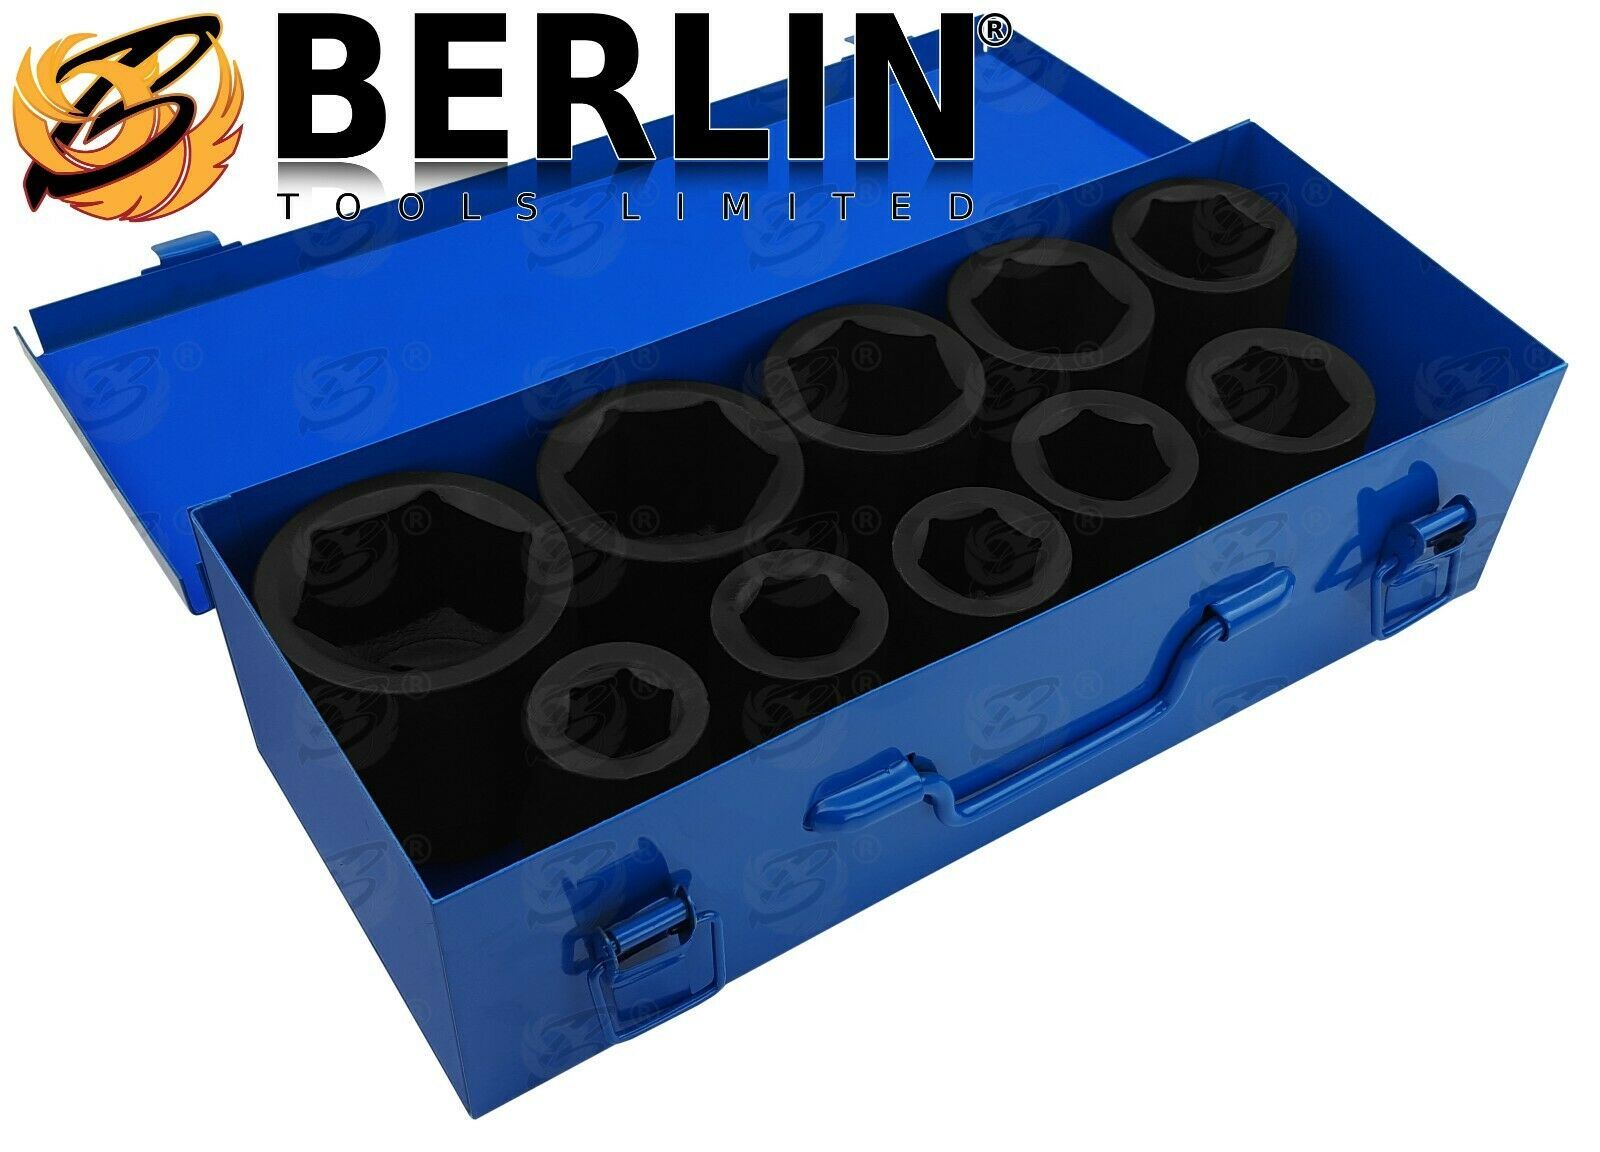 Front Of Blue Storage Tin Holding 10 Deep Impact sockets